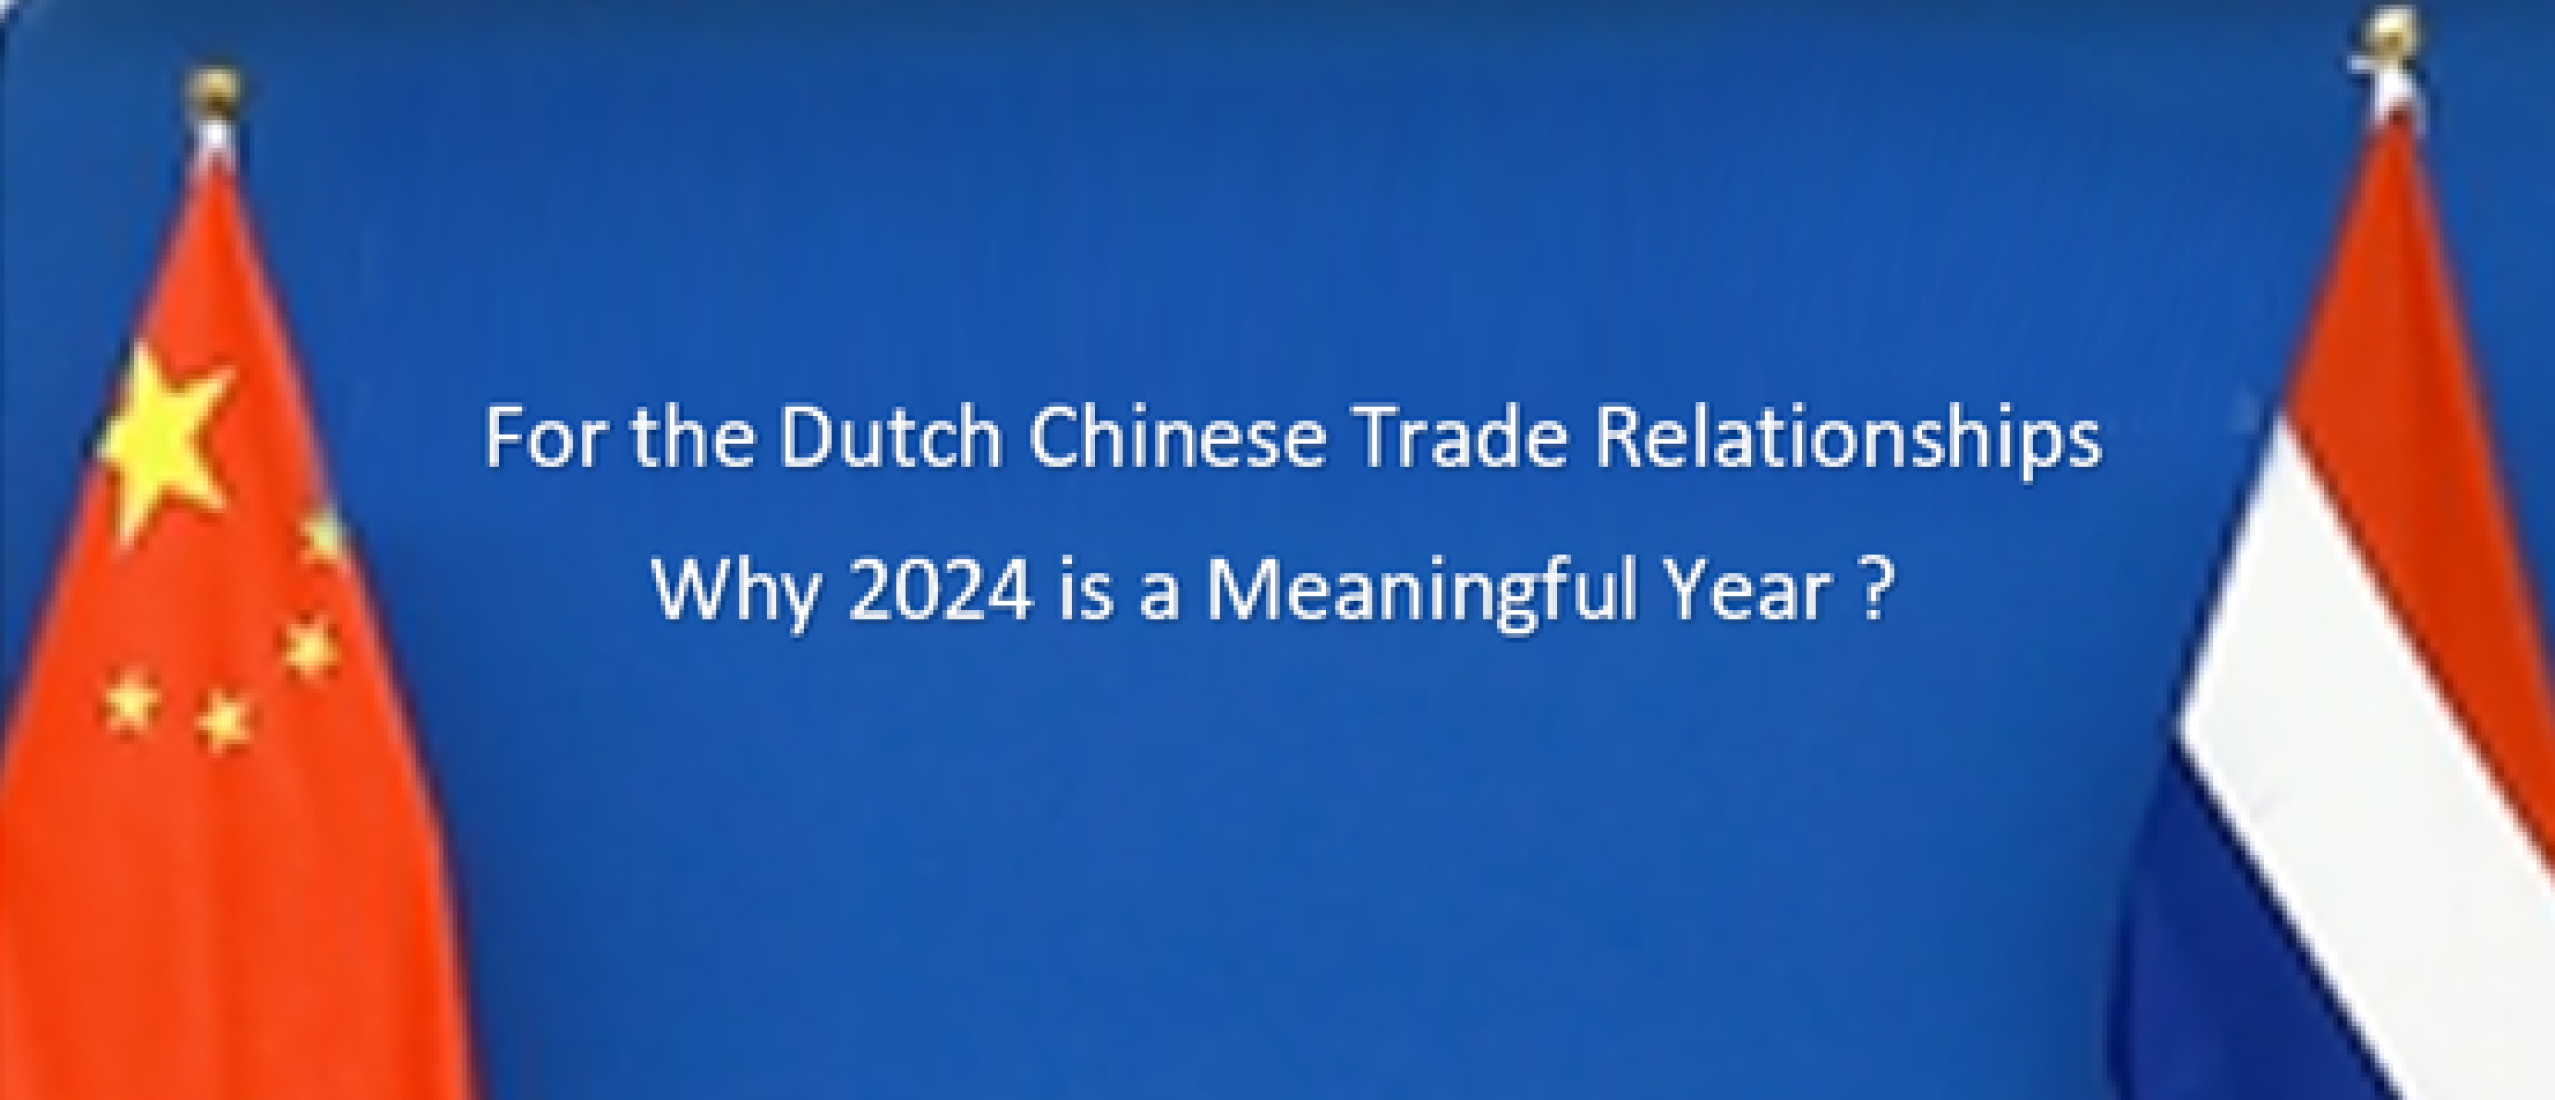 For Dutch Chinese Trade Relationships - Why 2024 is a Meaningful Year?